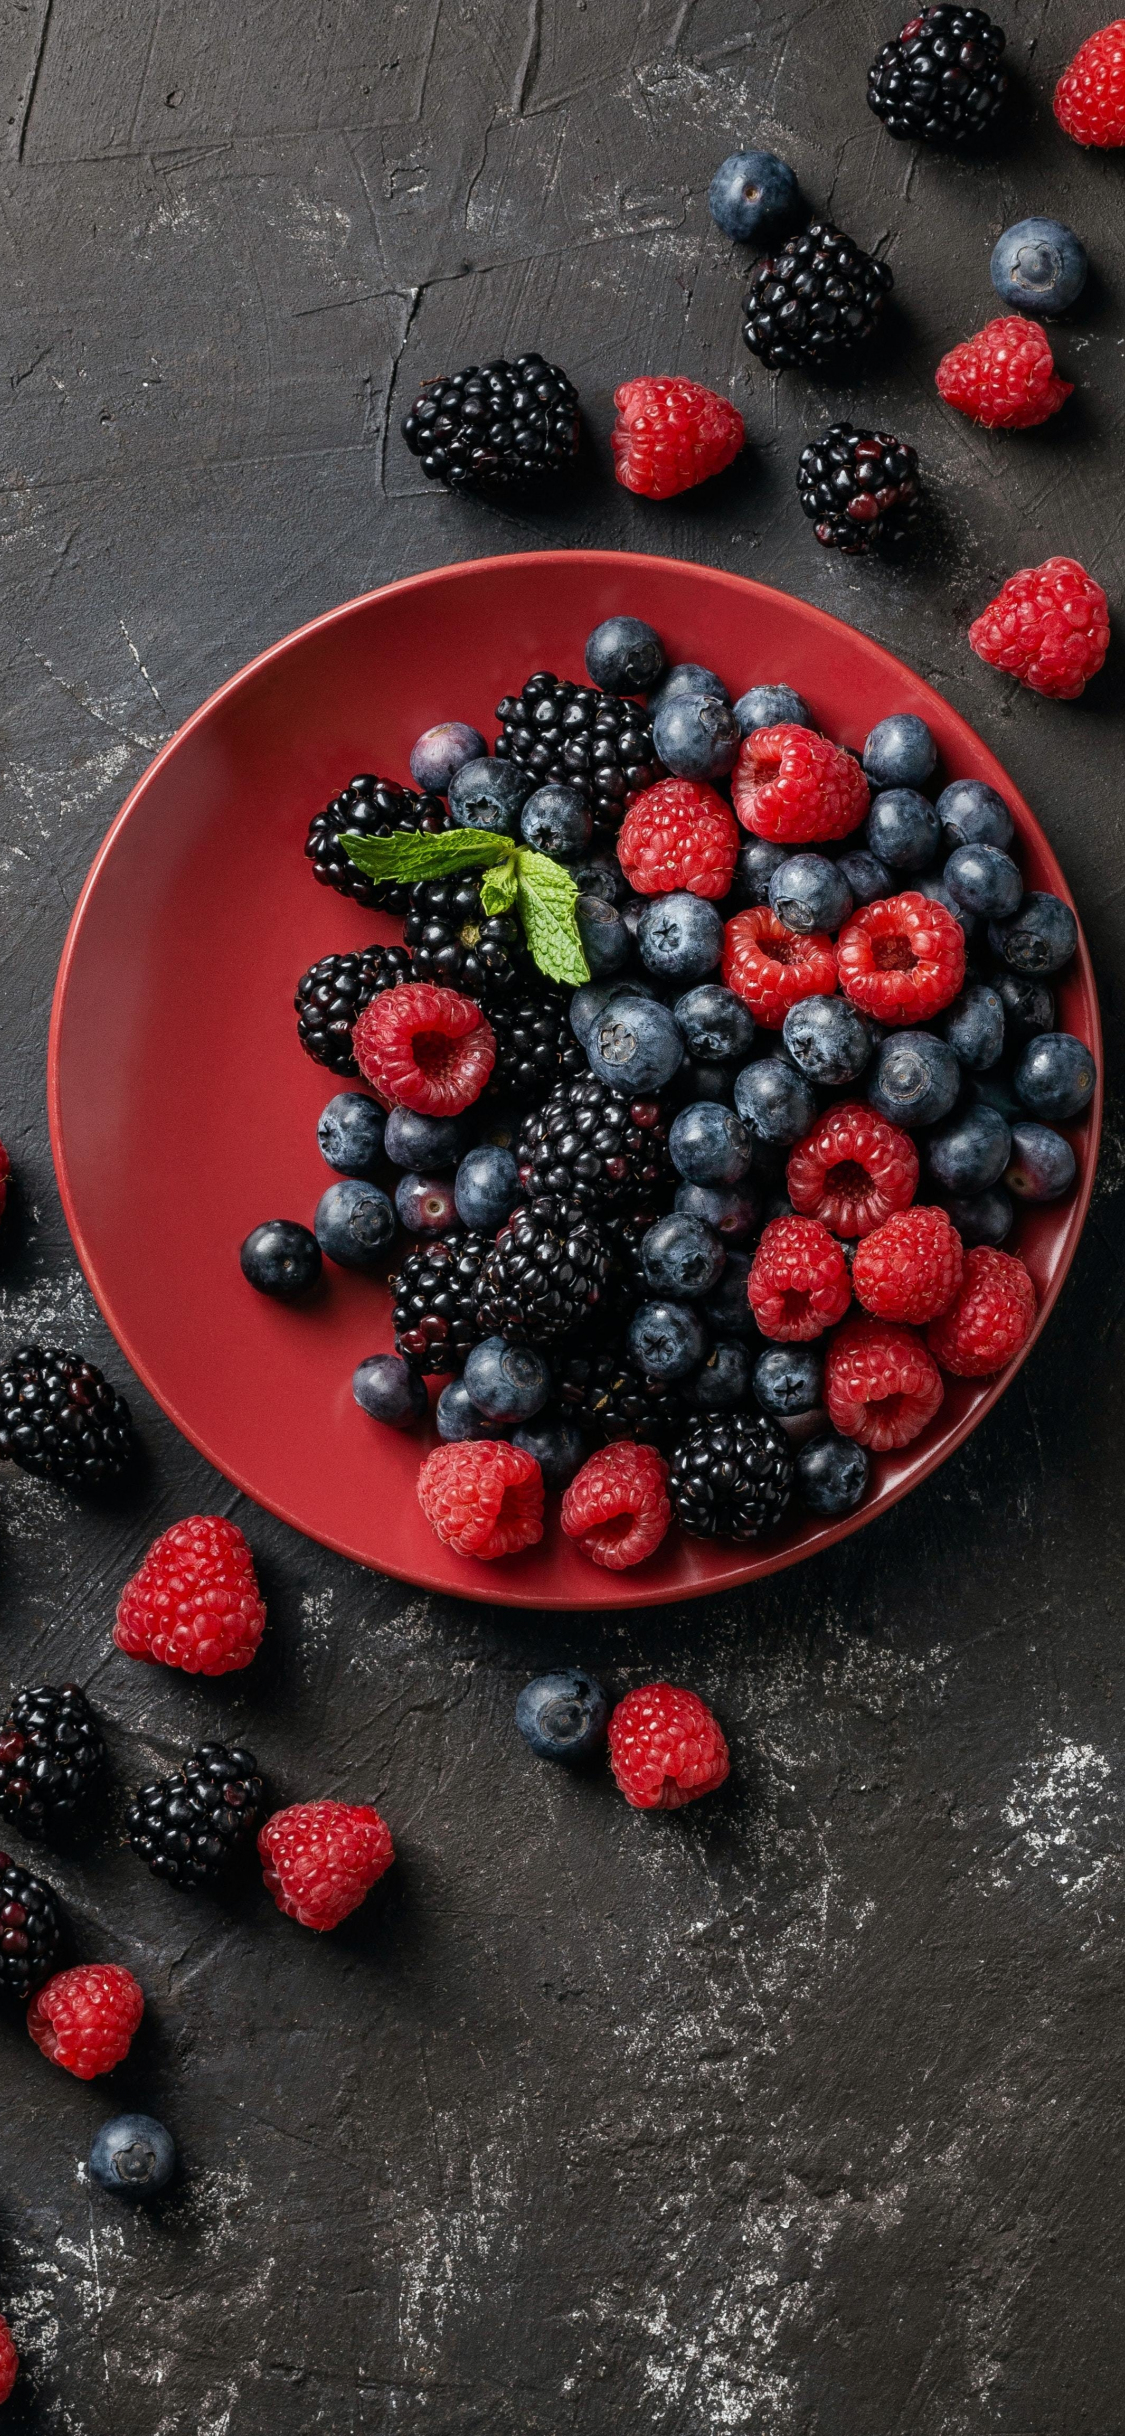 Download wallpaper 1125x2436 berries, delicious fruits, iphone x, 1125x2436  hd background, 25293